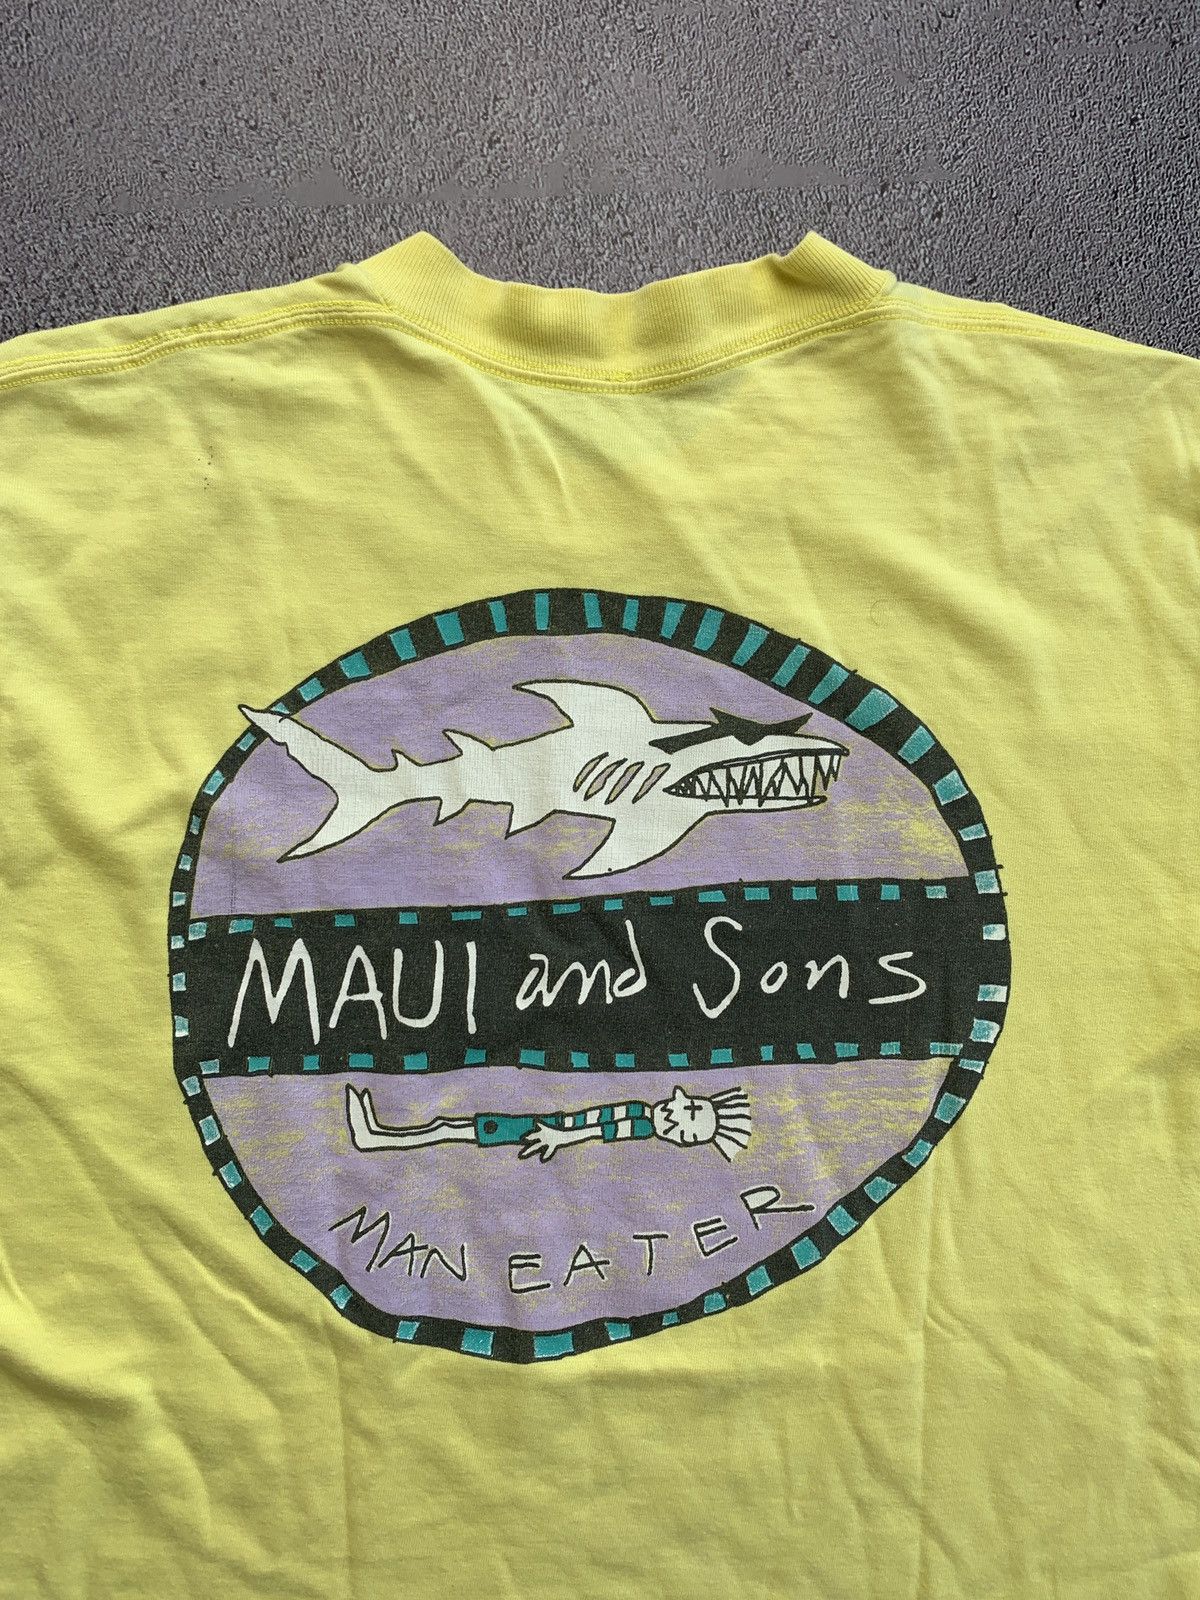 Vintage Vintage 90s Vintage Maui And Sons t shirt made in usa Size US M / EU 48-50 / 2 - 4 Thumbnail